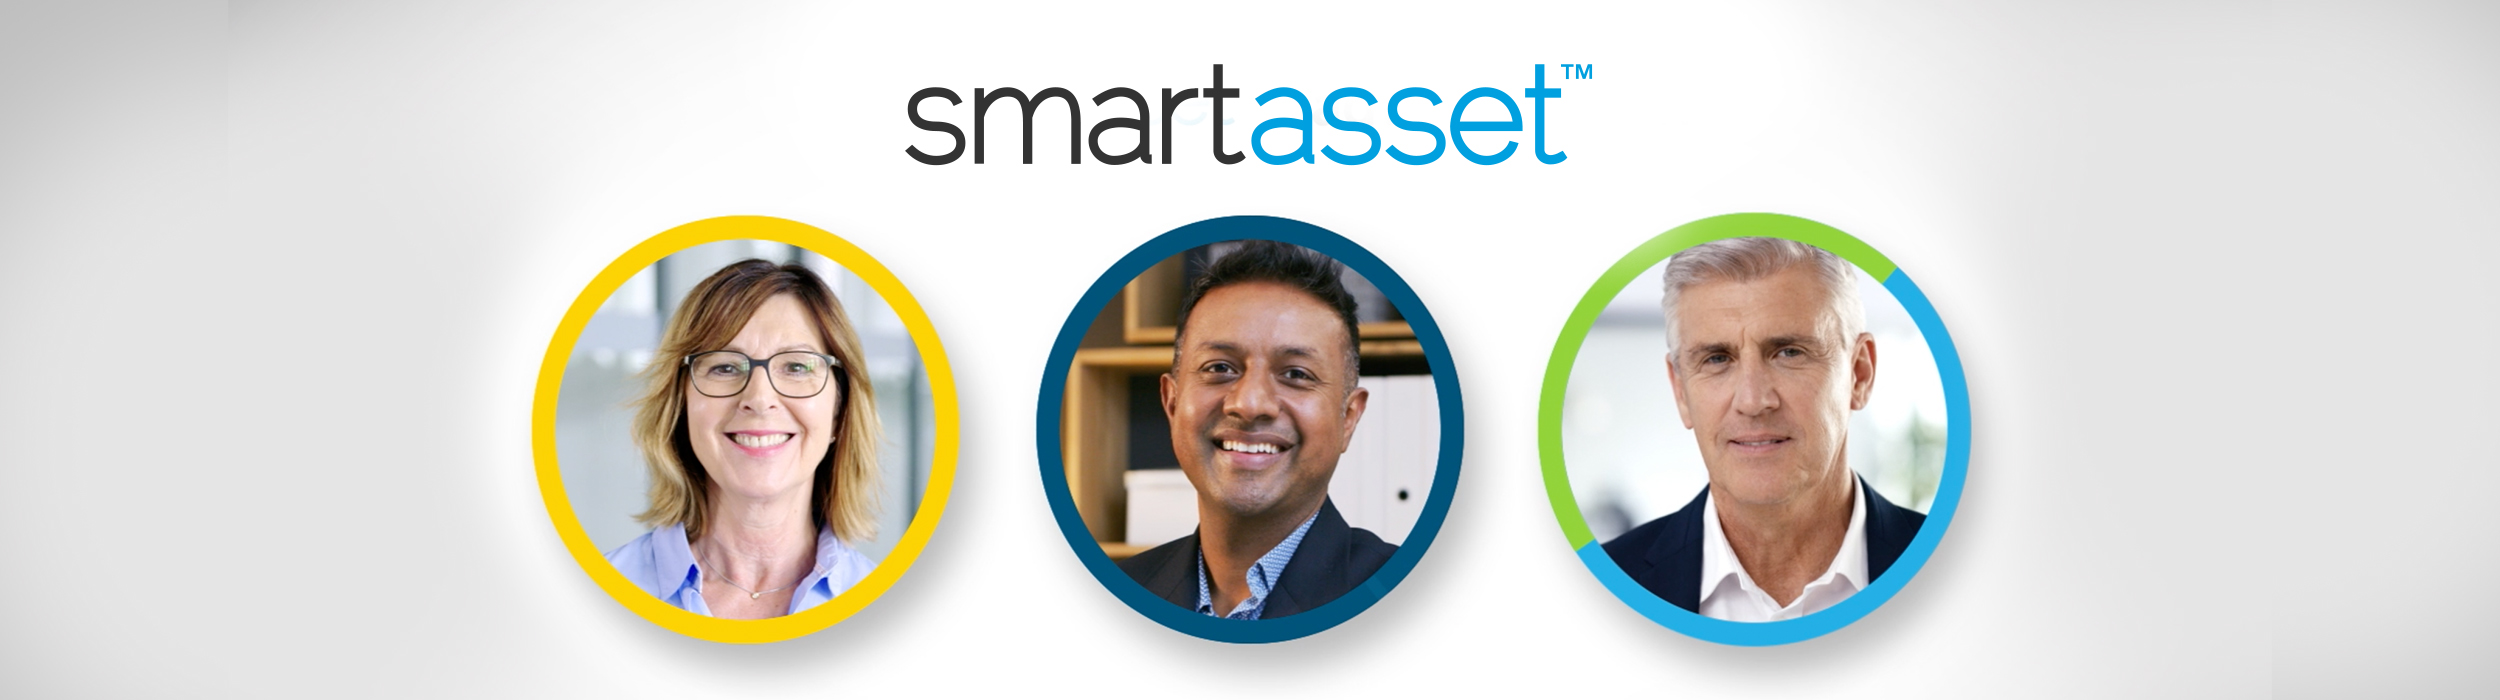 SmartAsset Launches a Simpler Road to Retirement on TV